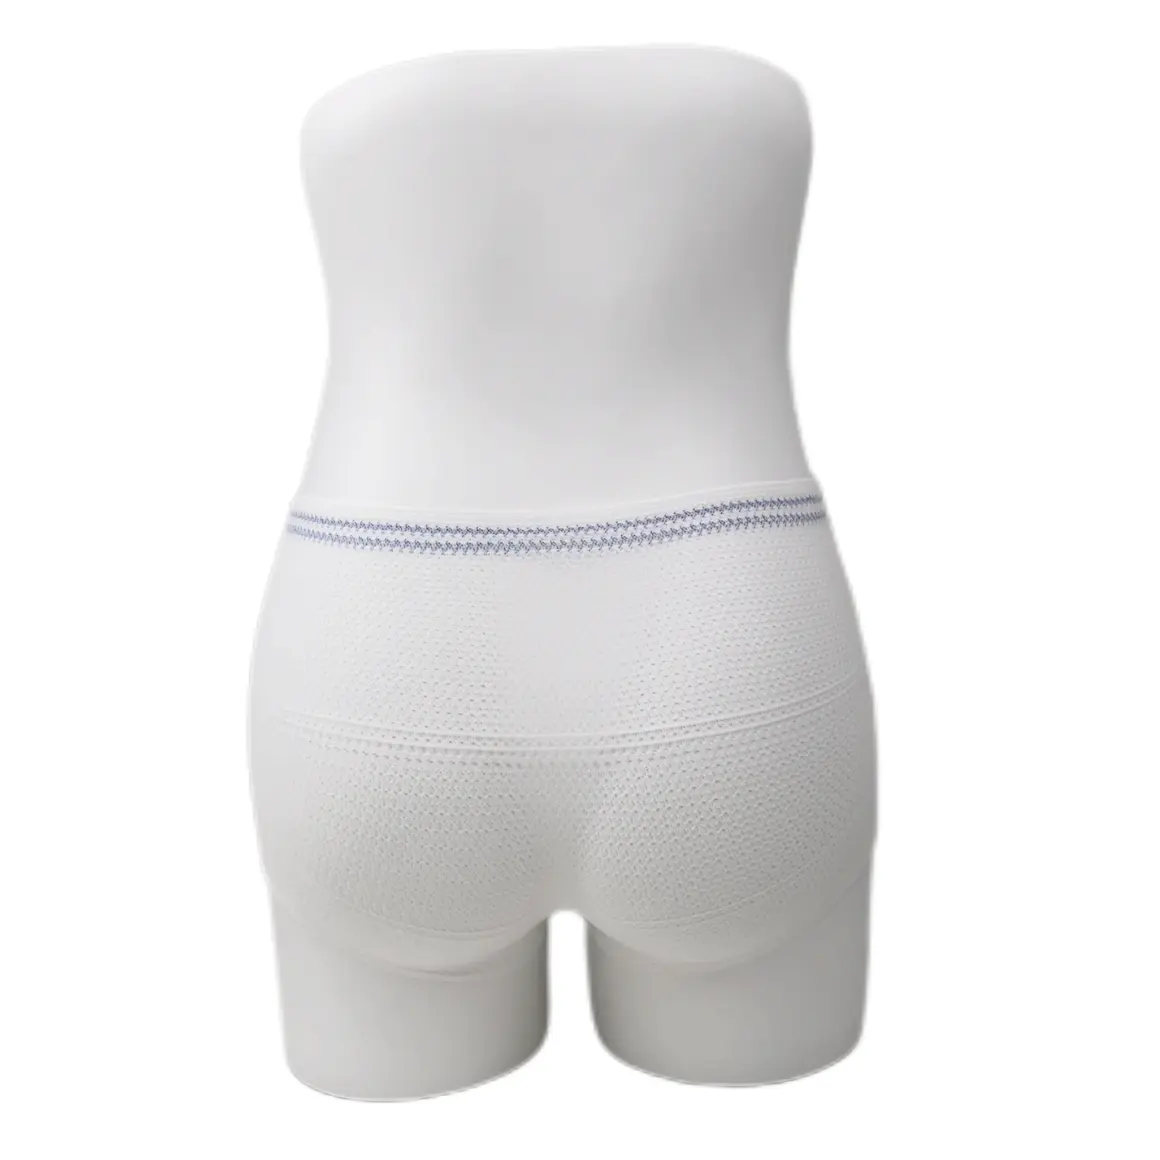 Disposable pants mesh disposable maternity unisex underwear briefs shorts for patients and the old